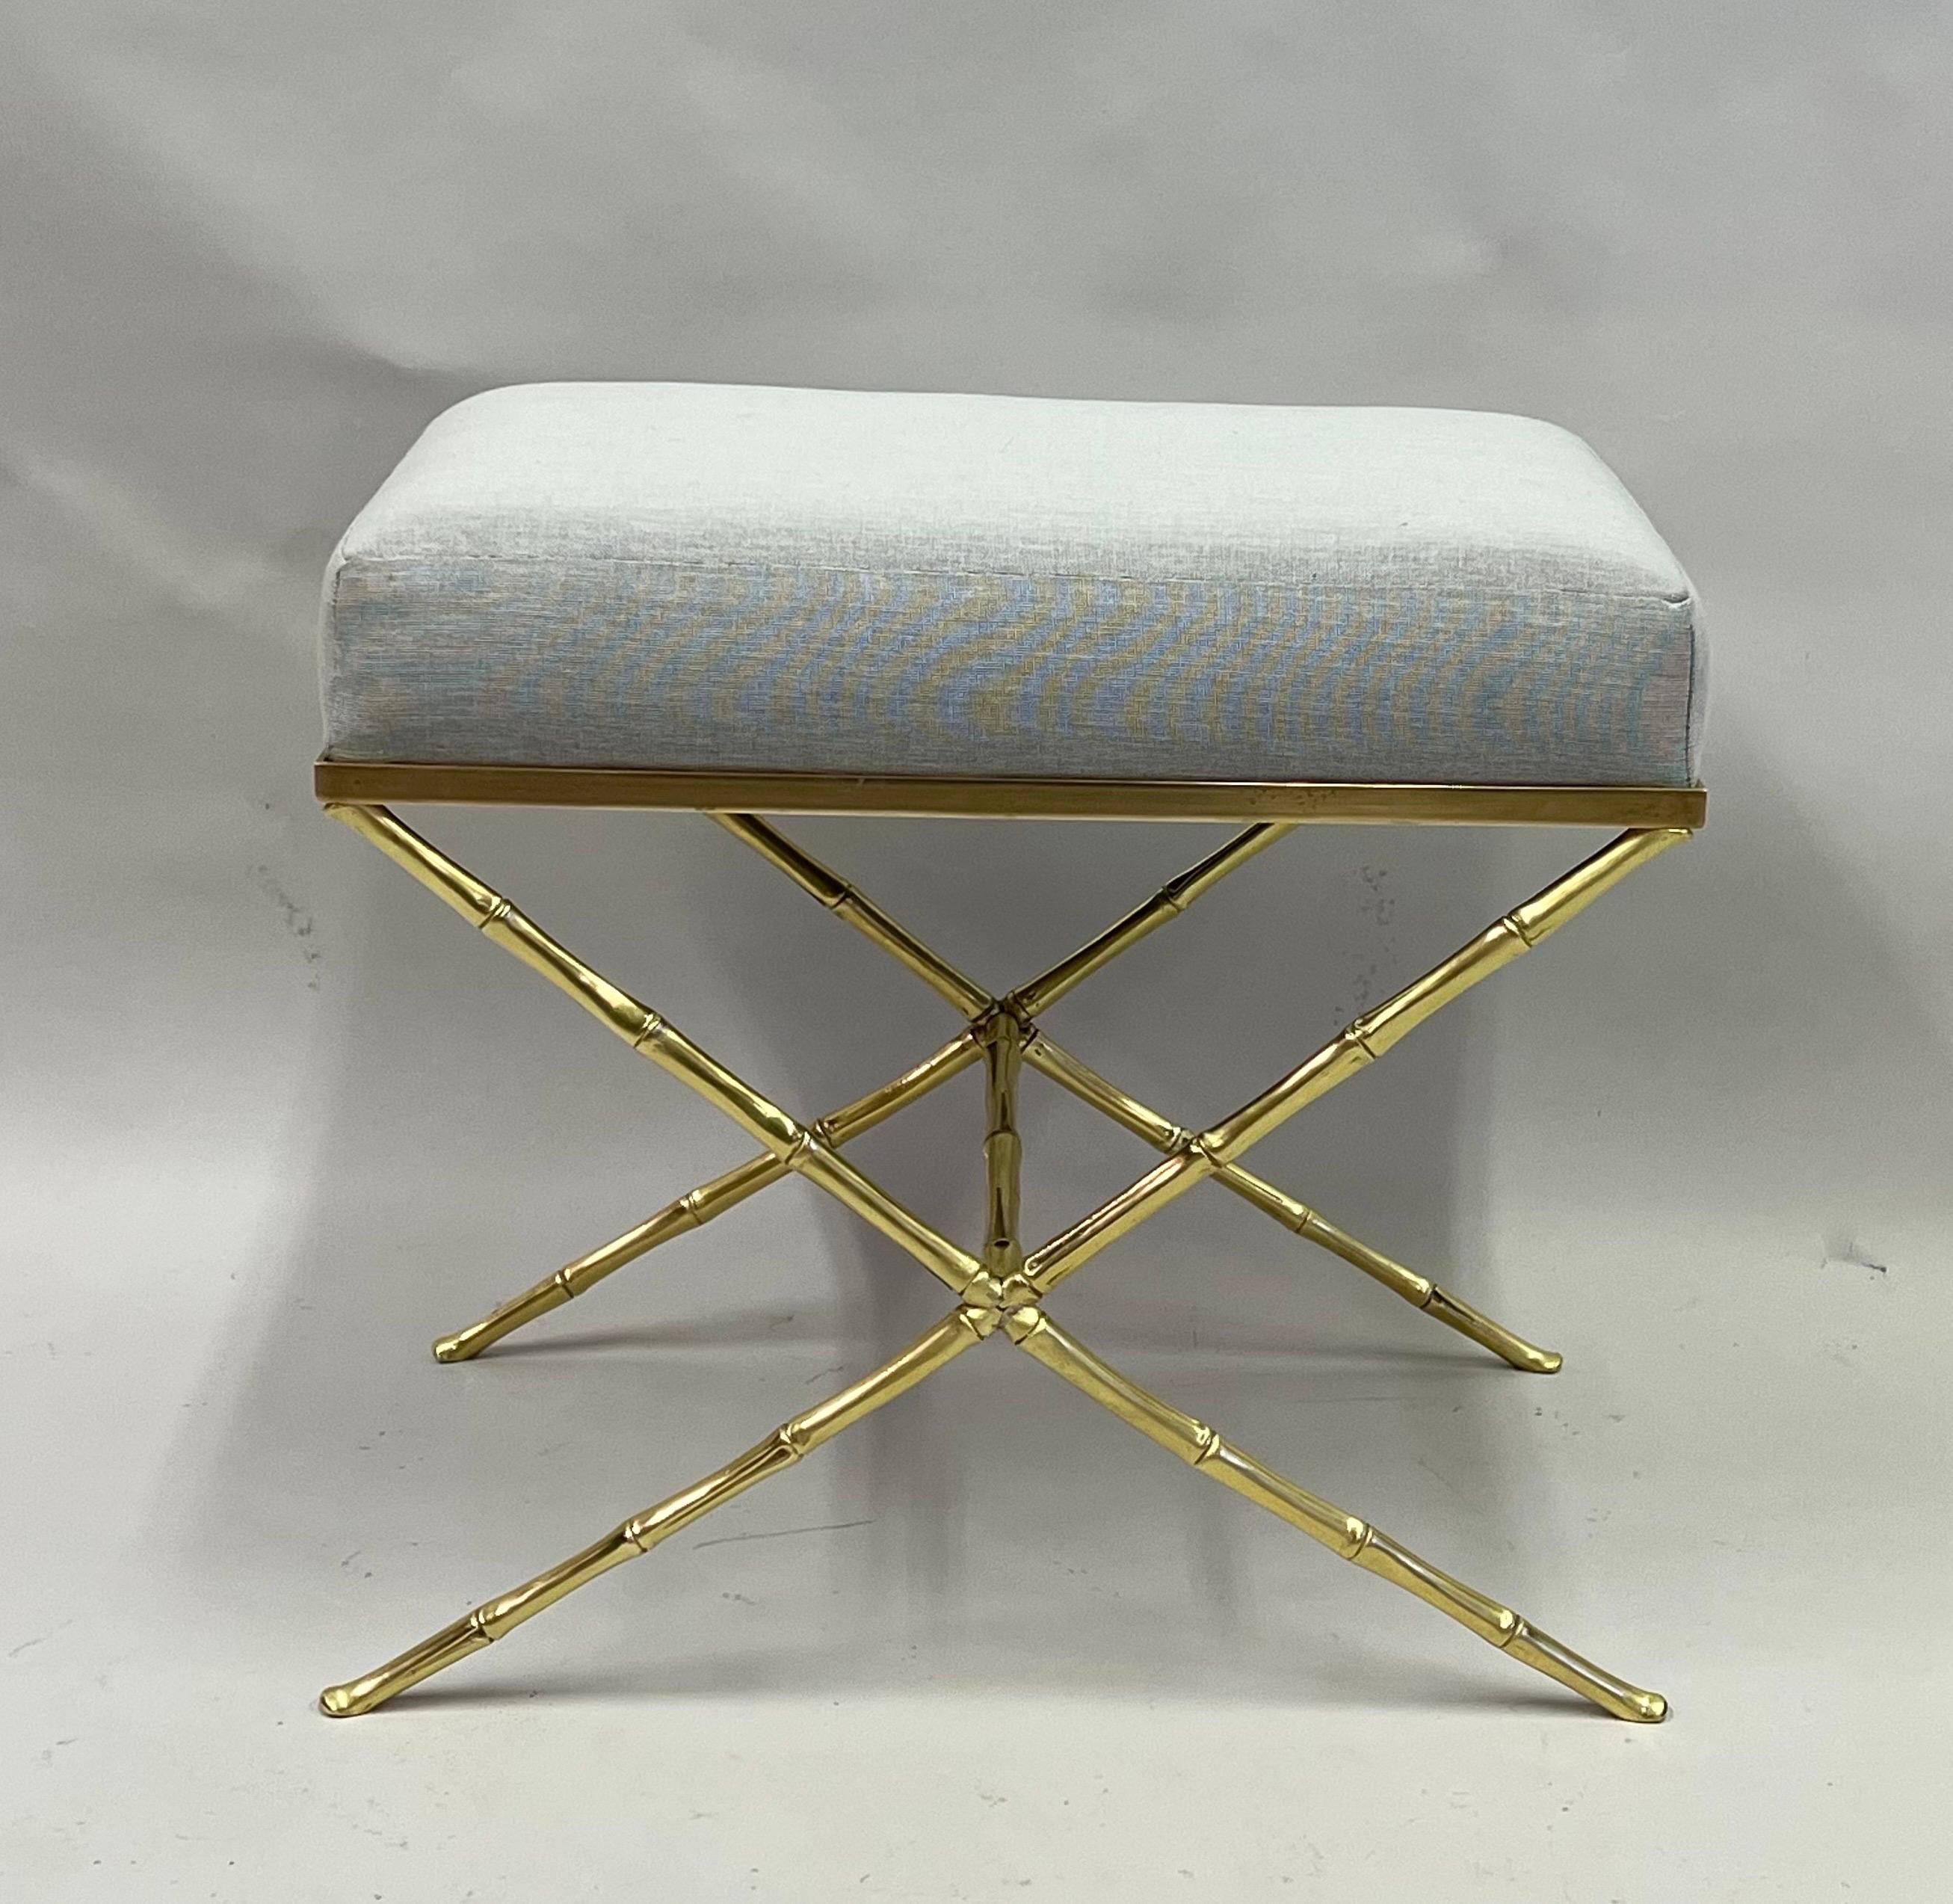 French Mid-Century Modern Neoclassical Brass Faux Bamboo Bench by Maison Baguès For Sale 1